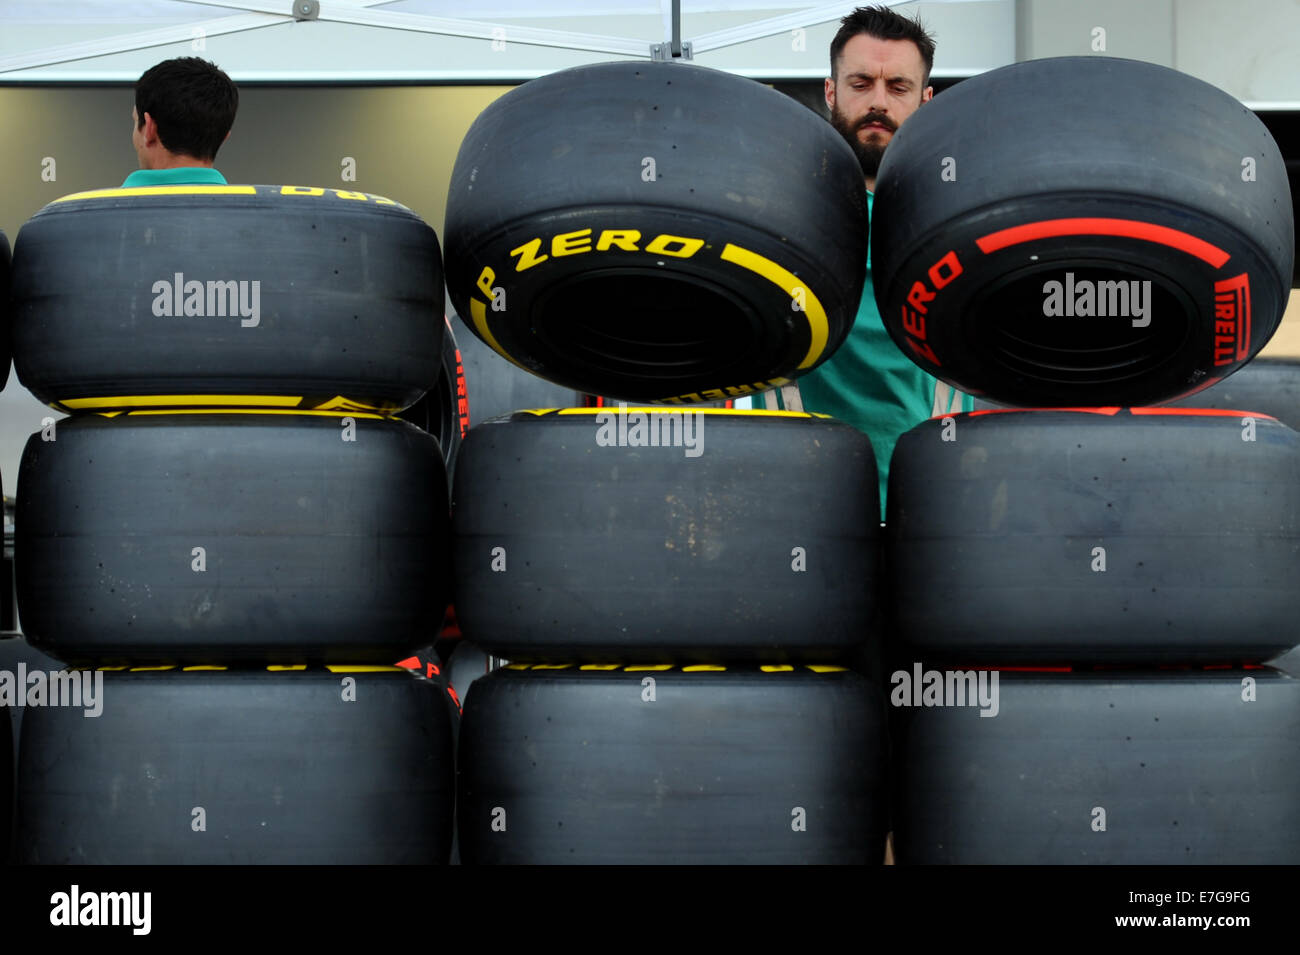 Singapore, Sept. 17. 19th Sep, 2014. A member of the Mercedes team arranges tires in Singapore, Sept. 17, 2014. The Singapore Grand Prix is going to be held on Sept. 19, 2014. © Then Chih Wey/Xinhua/Alamy Live News Stock Photo